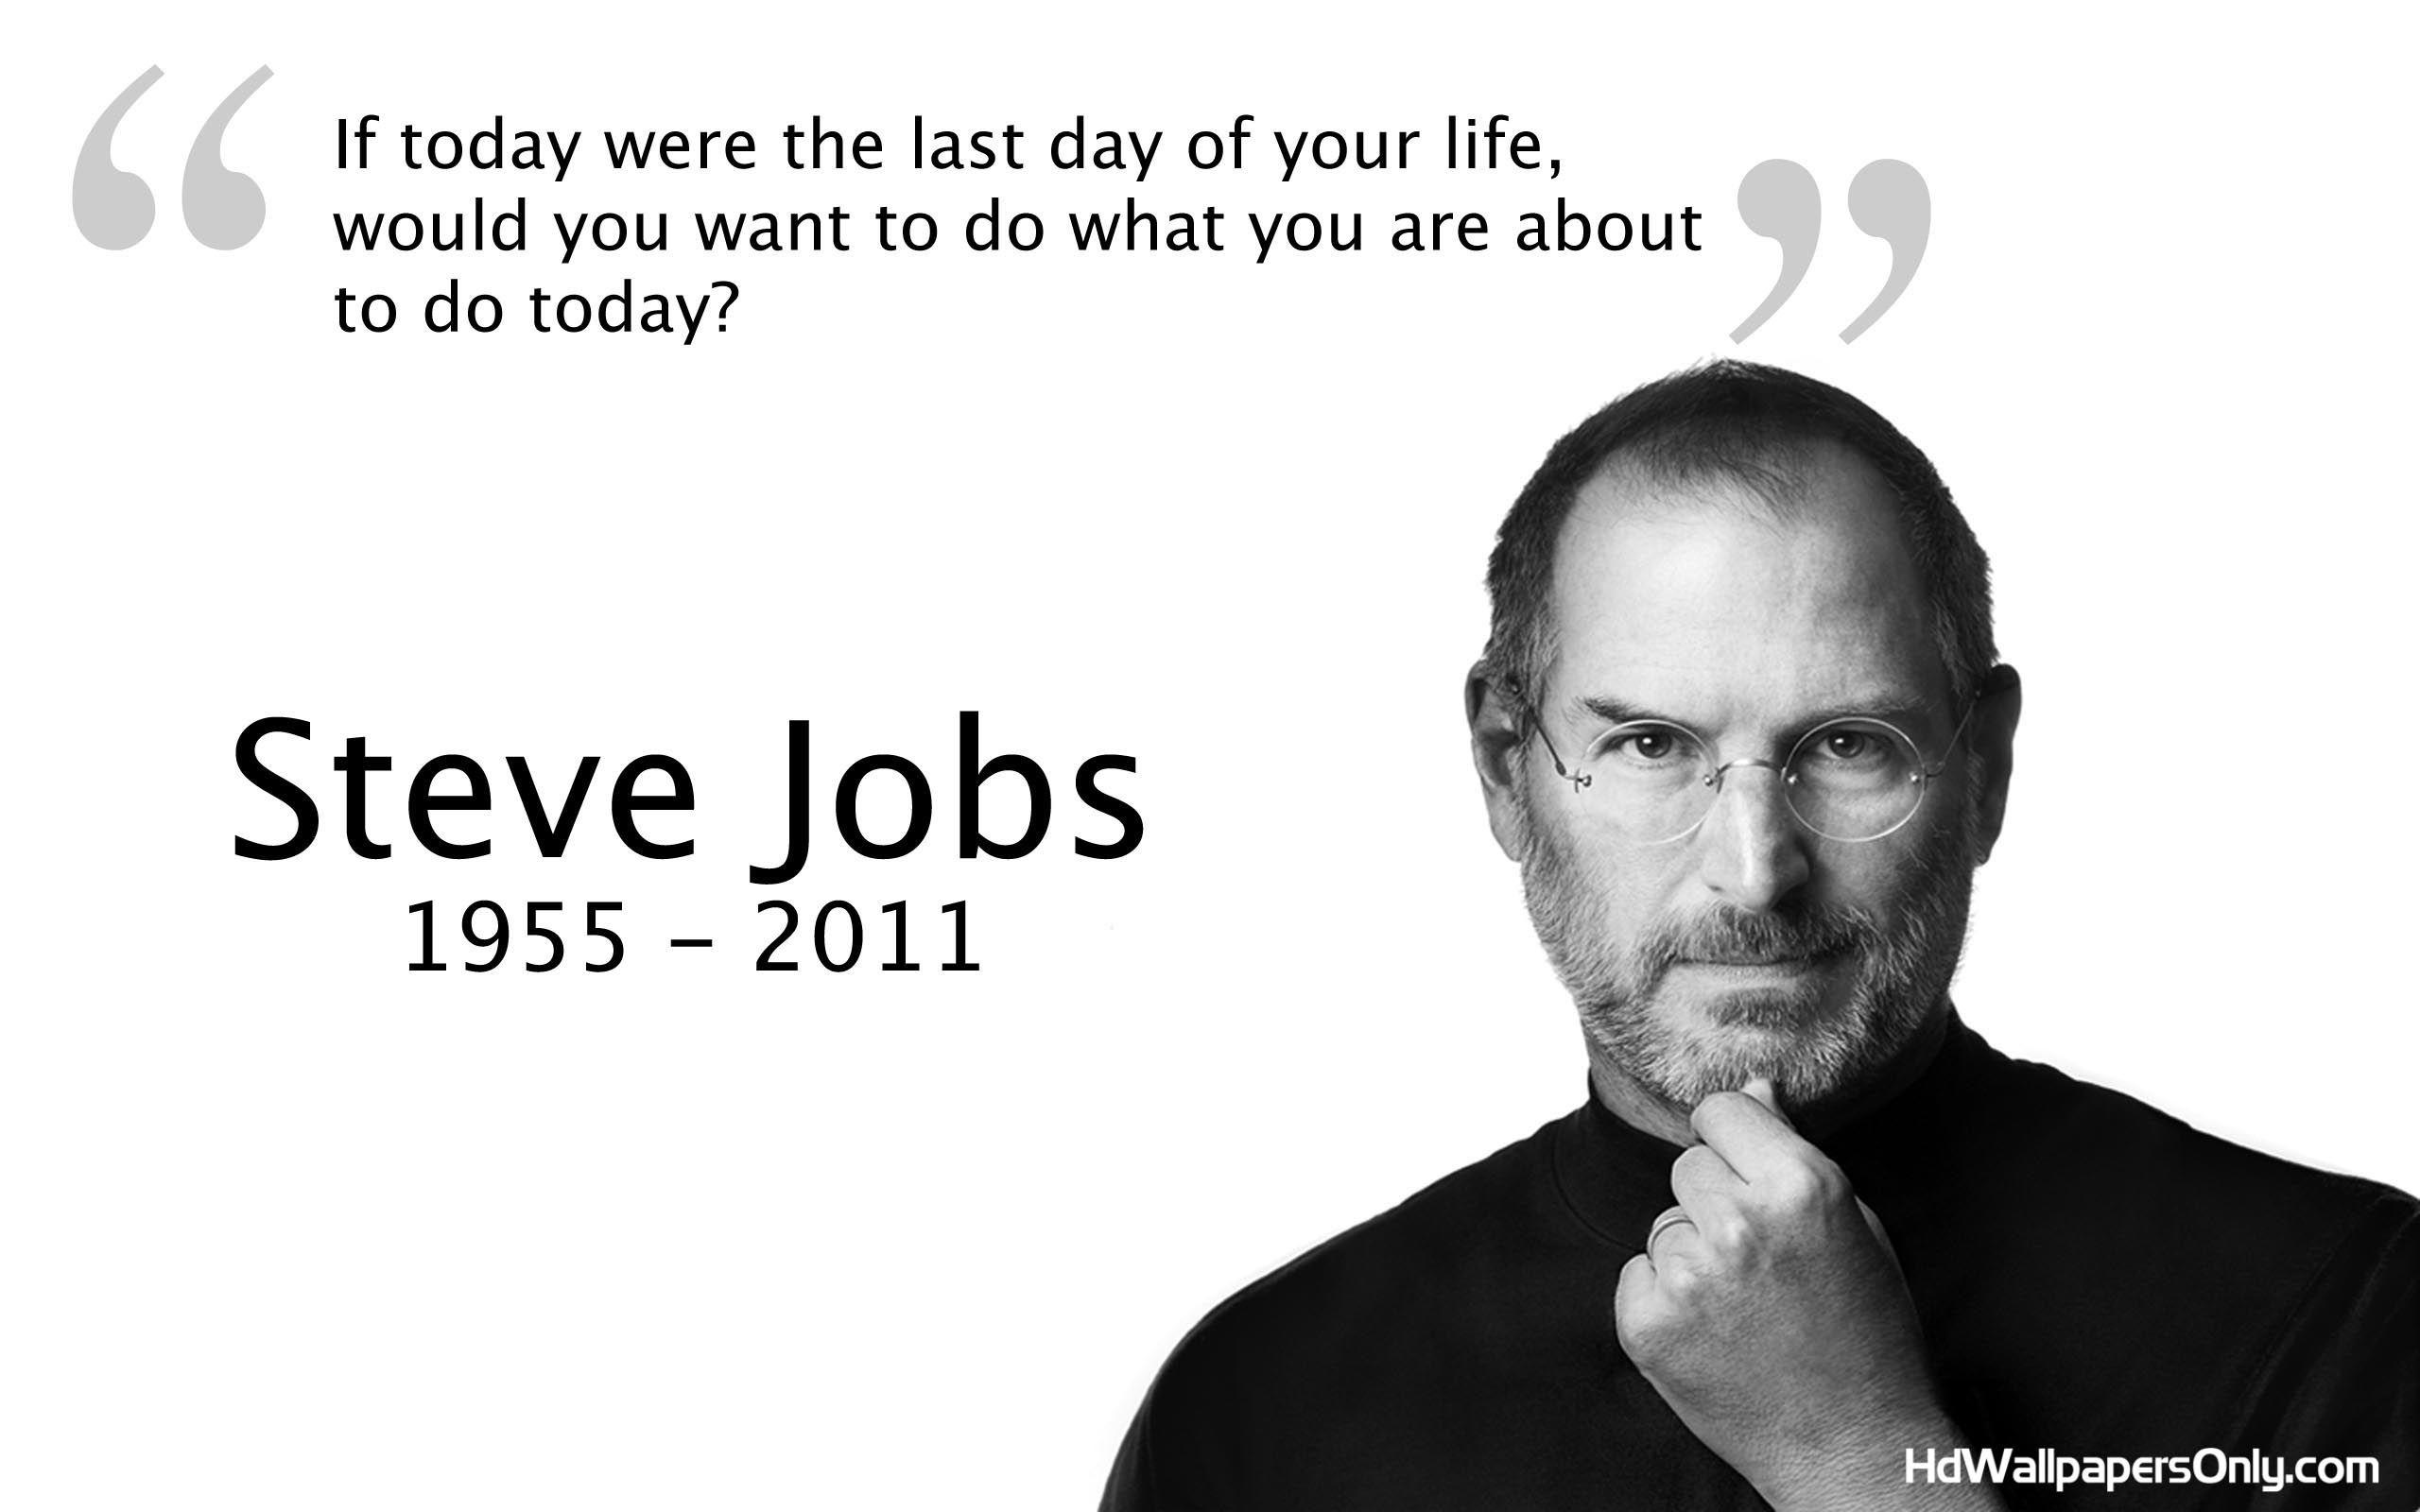 Steve Jobs Quotes Wallpapers - Top Free Steve Jobs Quotes Backgrounds